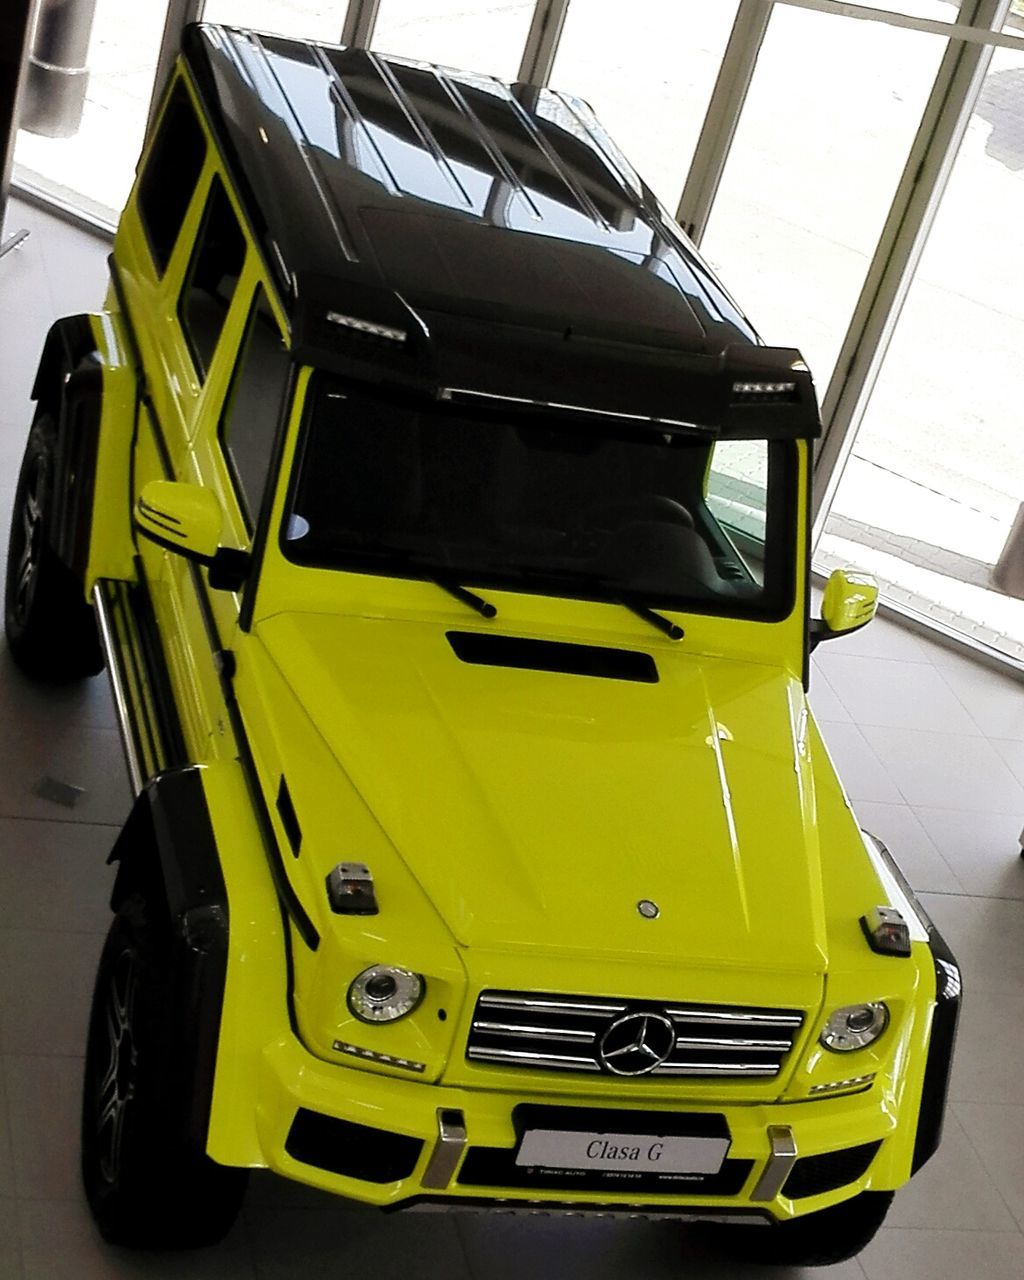 VIEW OF YELLOW CAR